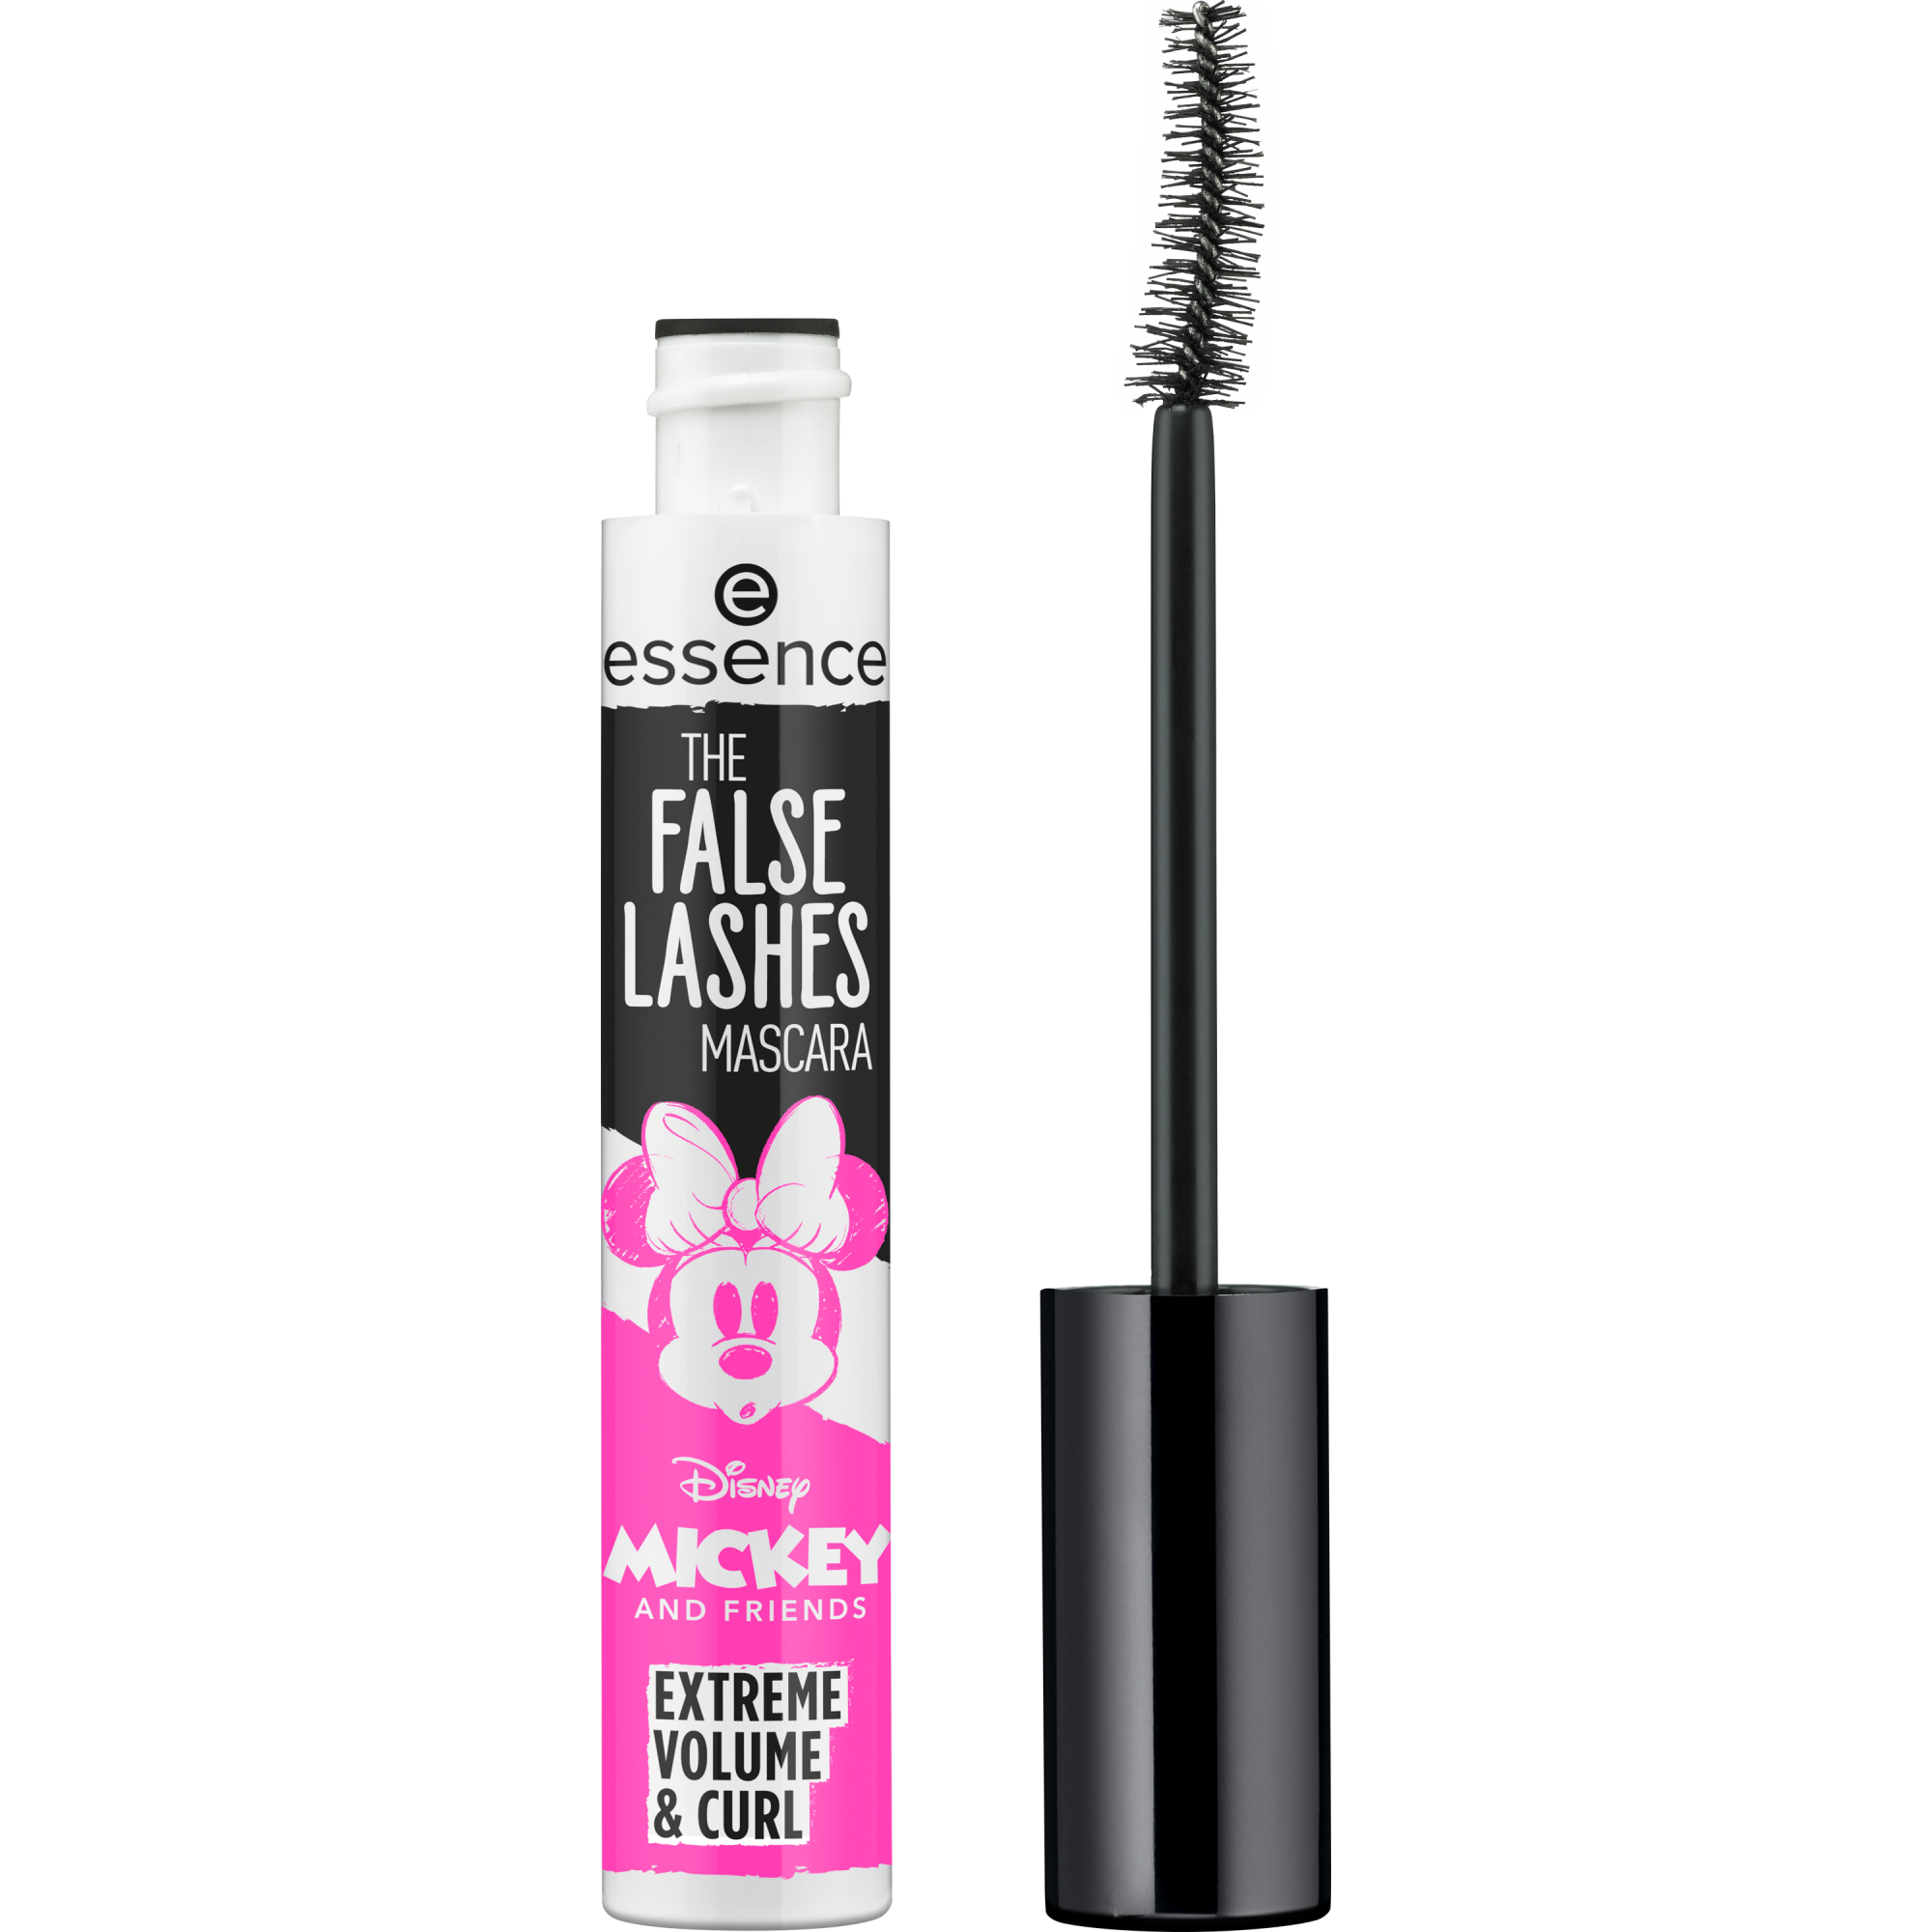 MÁSCARA THE FALSE LASHES EXTREME VOLUME & CURL Mickey and Friends de Disney